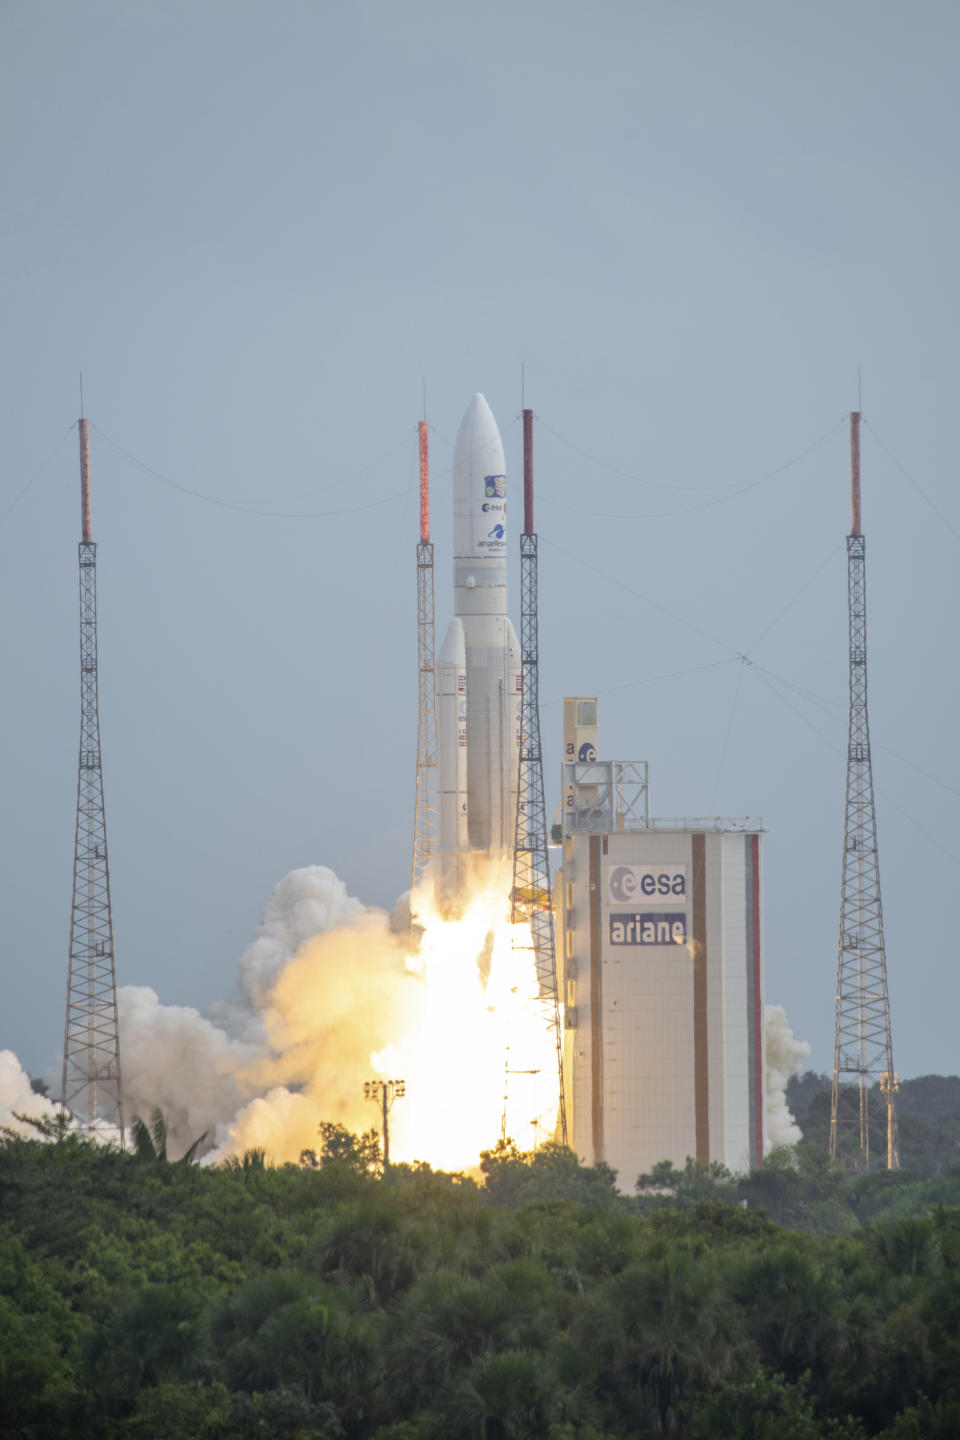 This photo provided by the European Space Agency shows an Ariane rocket carrying the Jupiter Icy Moons Explorer, Juice, spacecraft lifting off from Europe's Spaceport in Kourou, French Guiana, Friday, April 14, 2023. A European spacecraft rocketed away Friday on a decadelong quest to explore Jupiter and three of its icy moons that could have buried oceans. (Manuel Pedoussaut/ESA via AP)